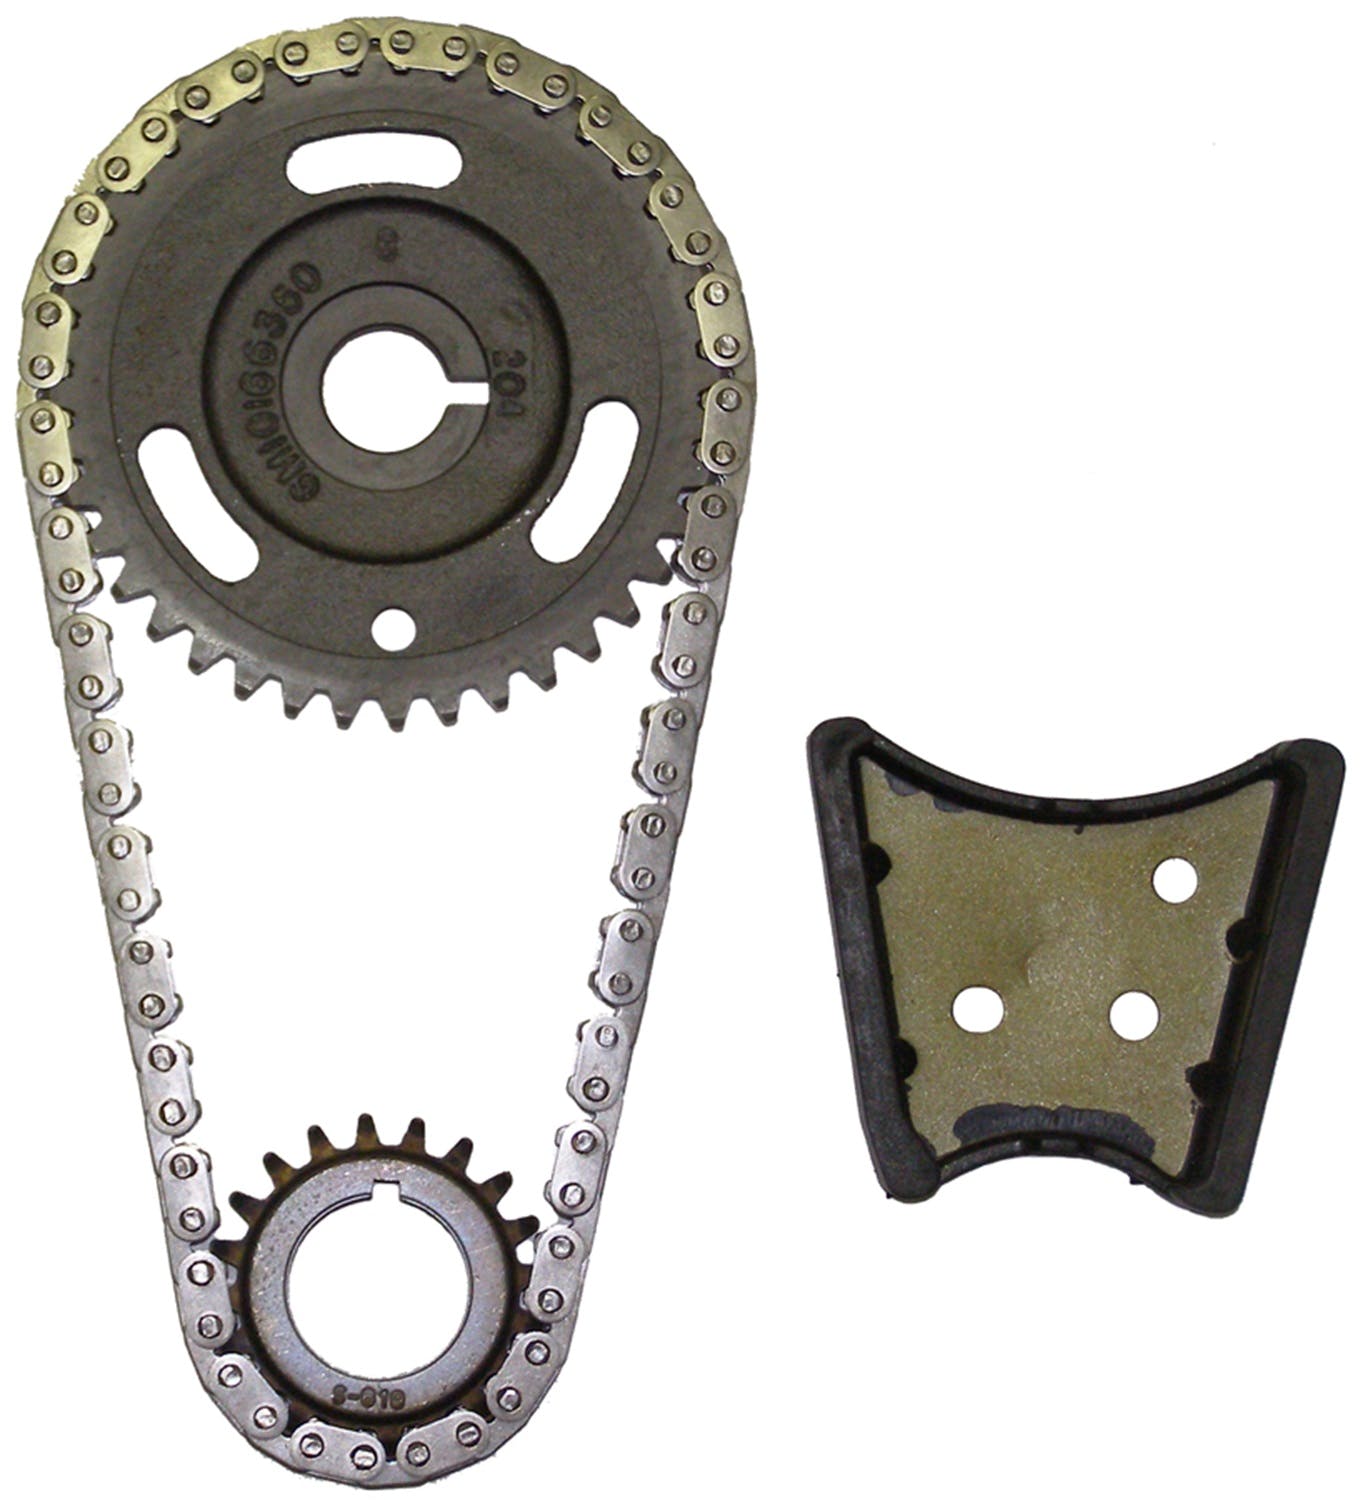 Cloyes 9-0385S Engine Timing Chain Kit Engine Timing Chain Kit